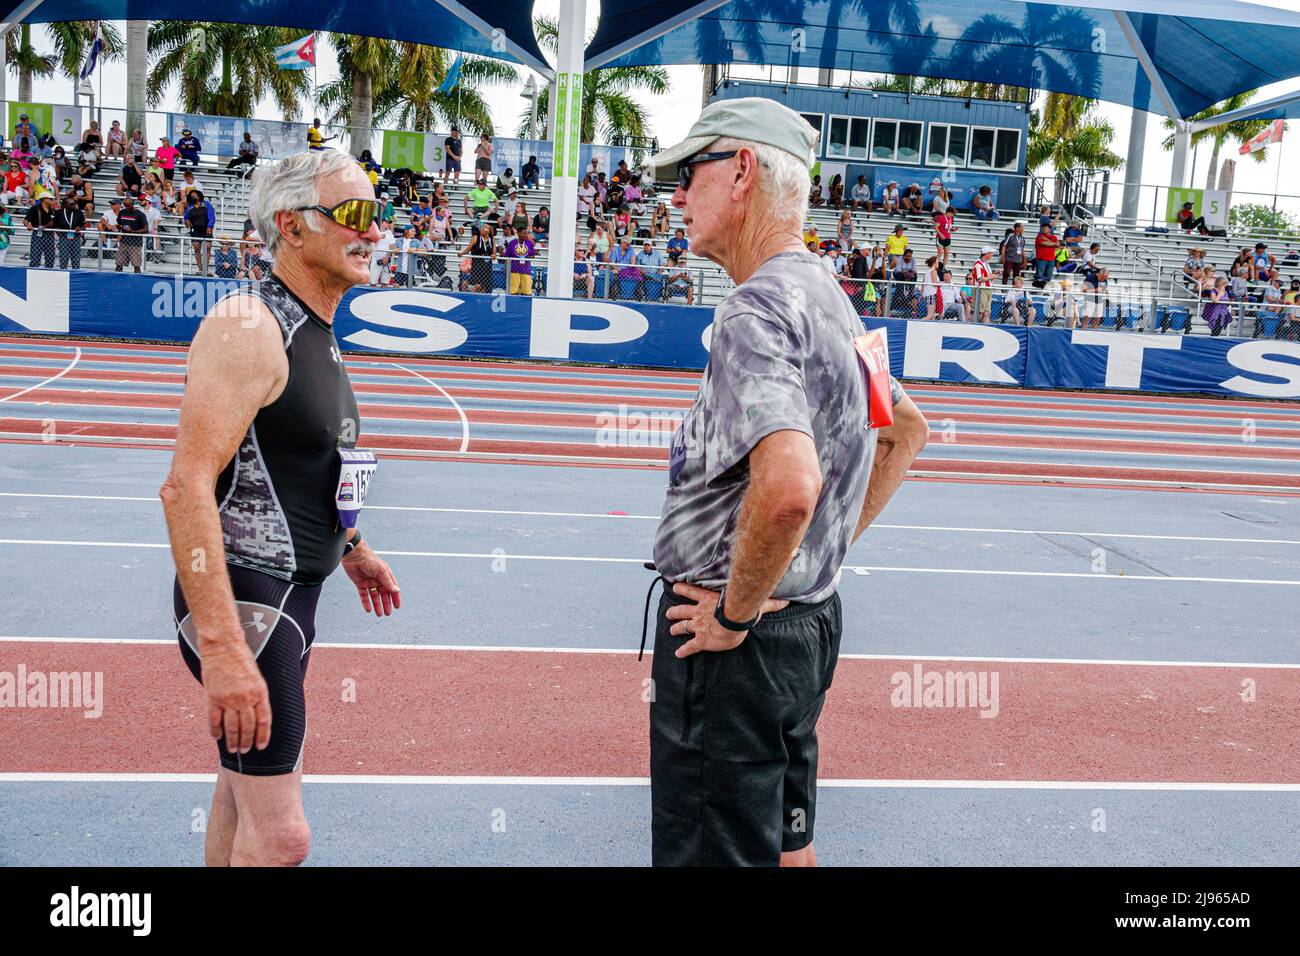 Fort Ft. Lauderdale Florida, Ansin Sports Complex Track & Field National Senior Games, hombres mayores corredores competidores Foto de stock